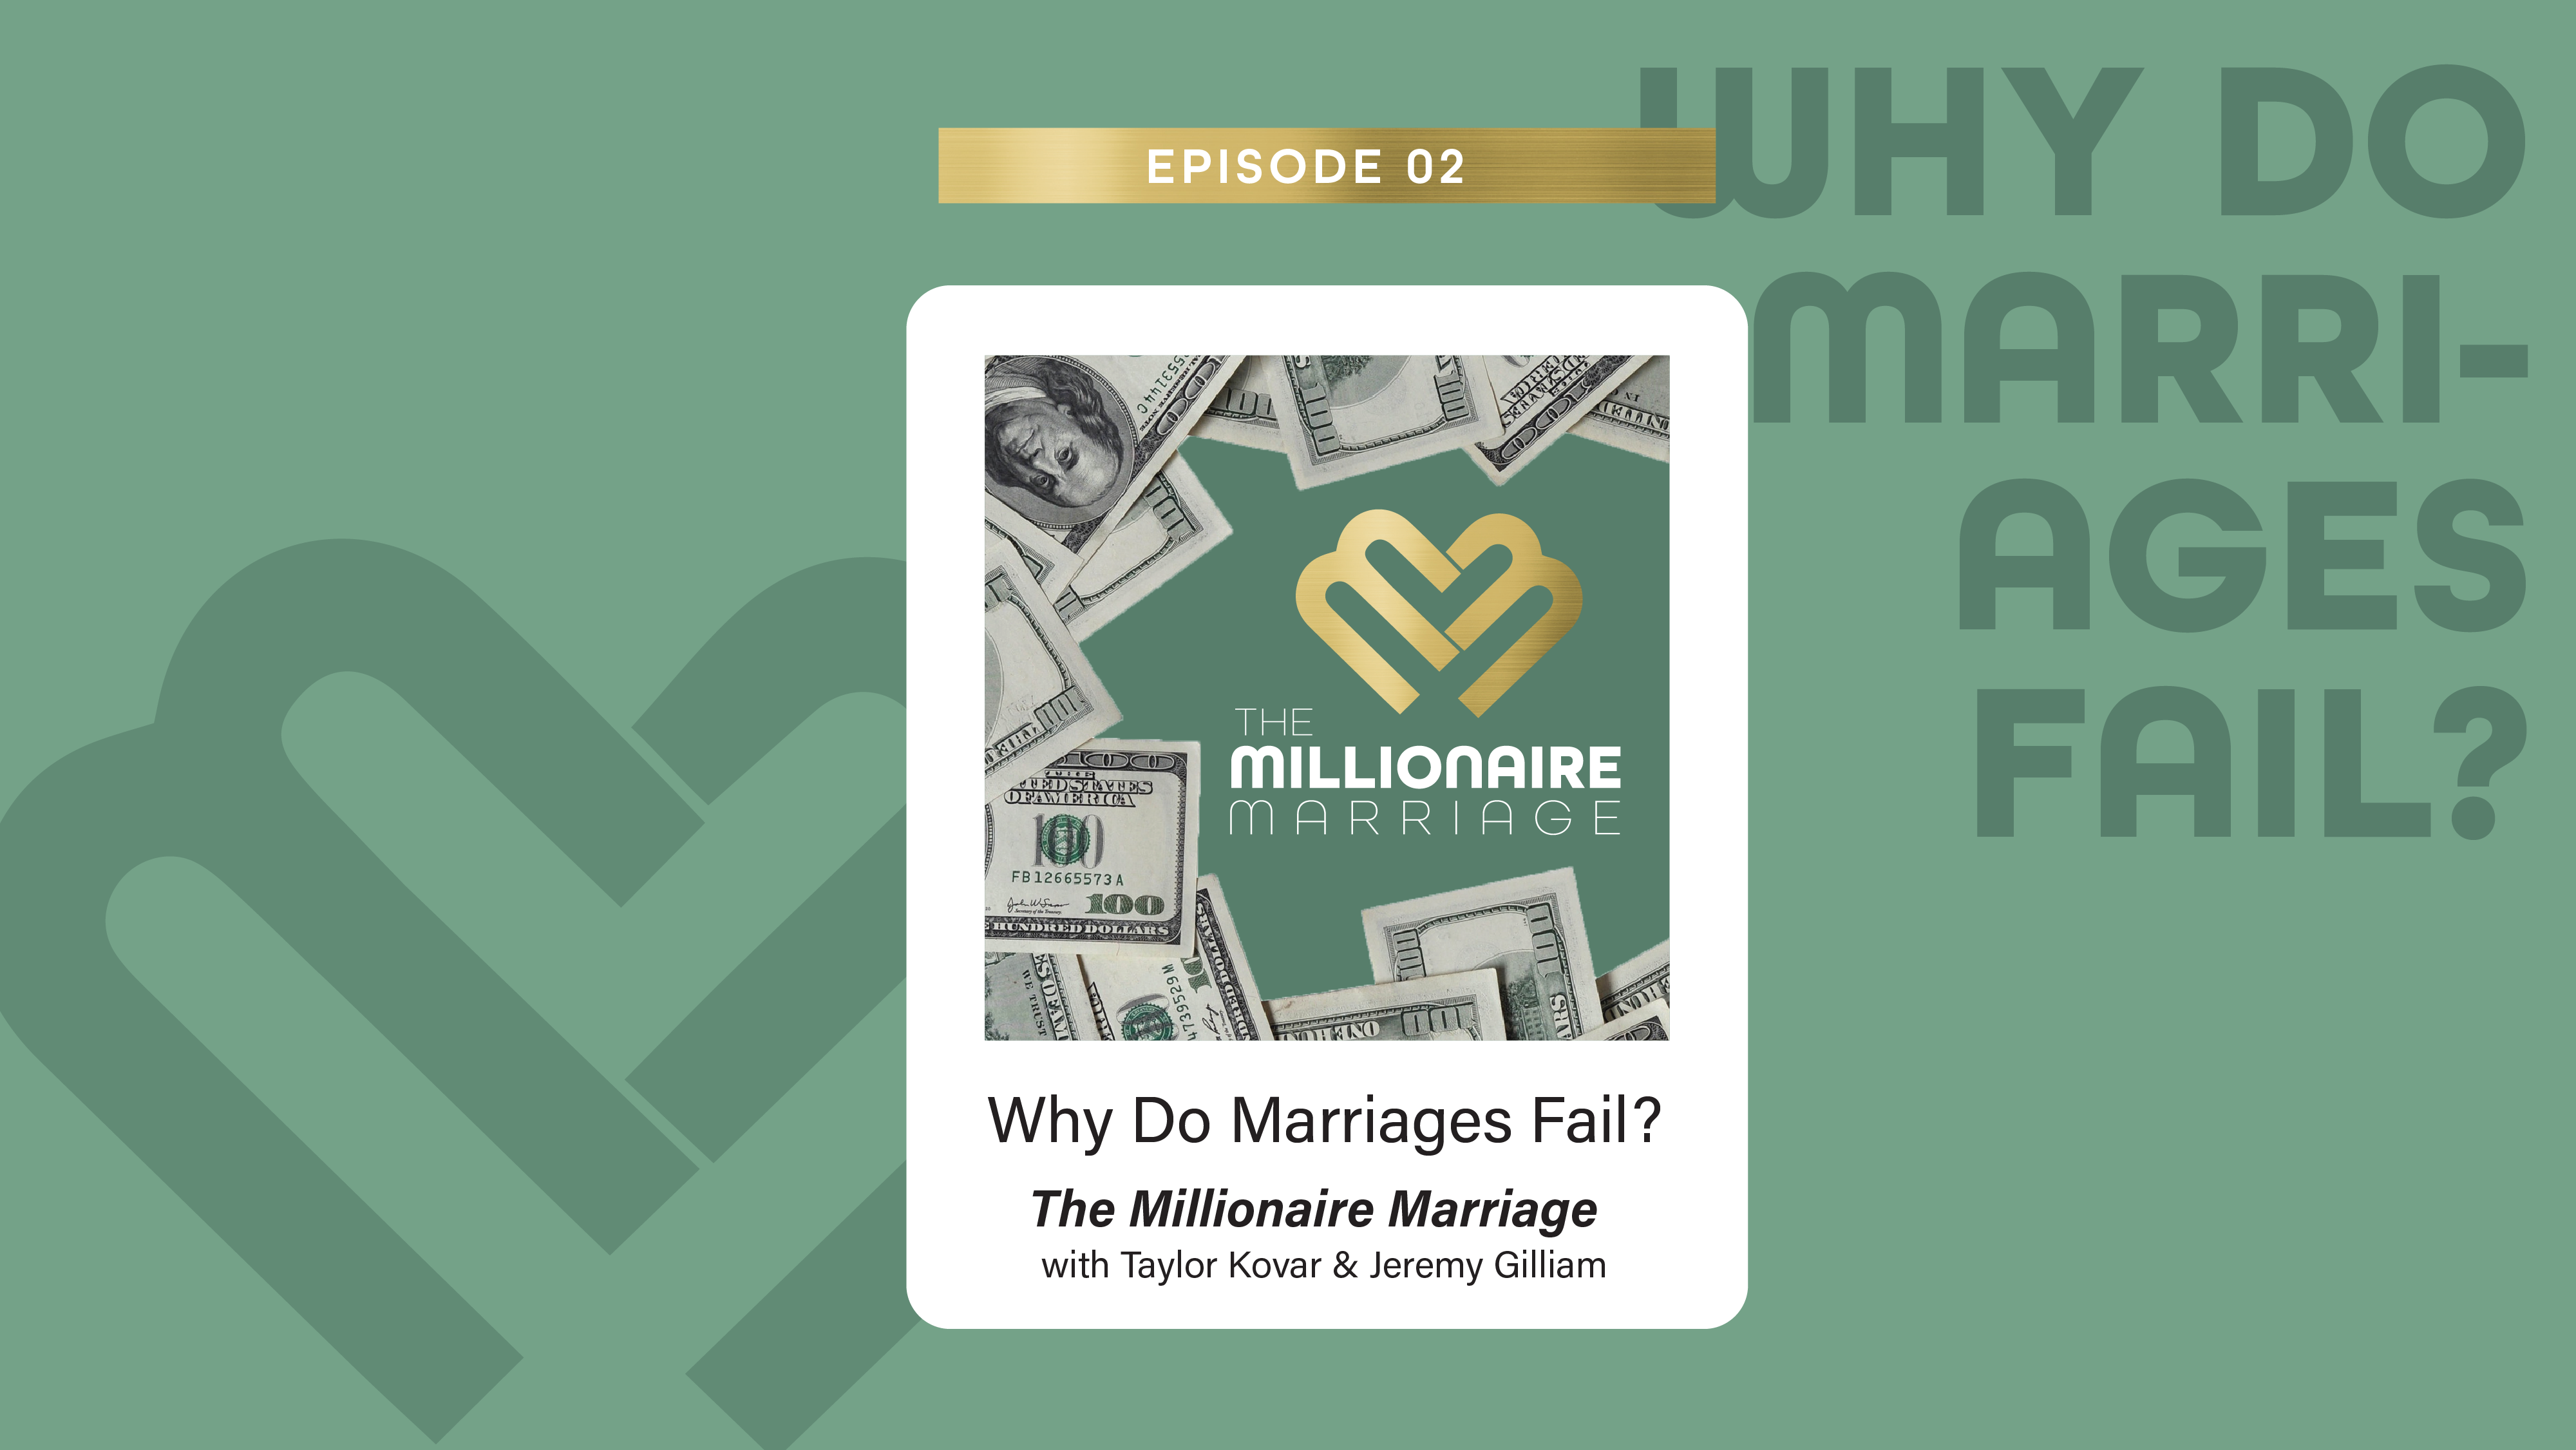 Why Do Marriages fail